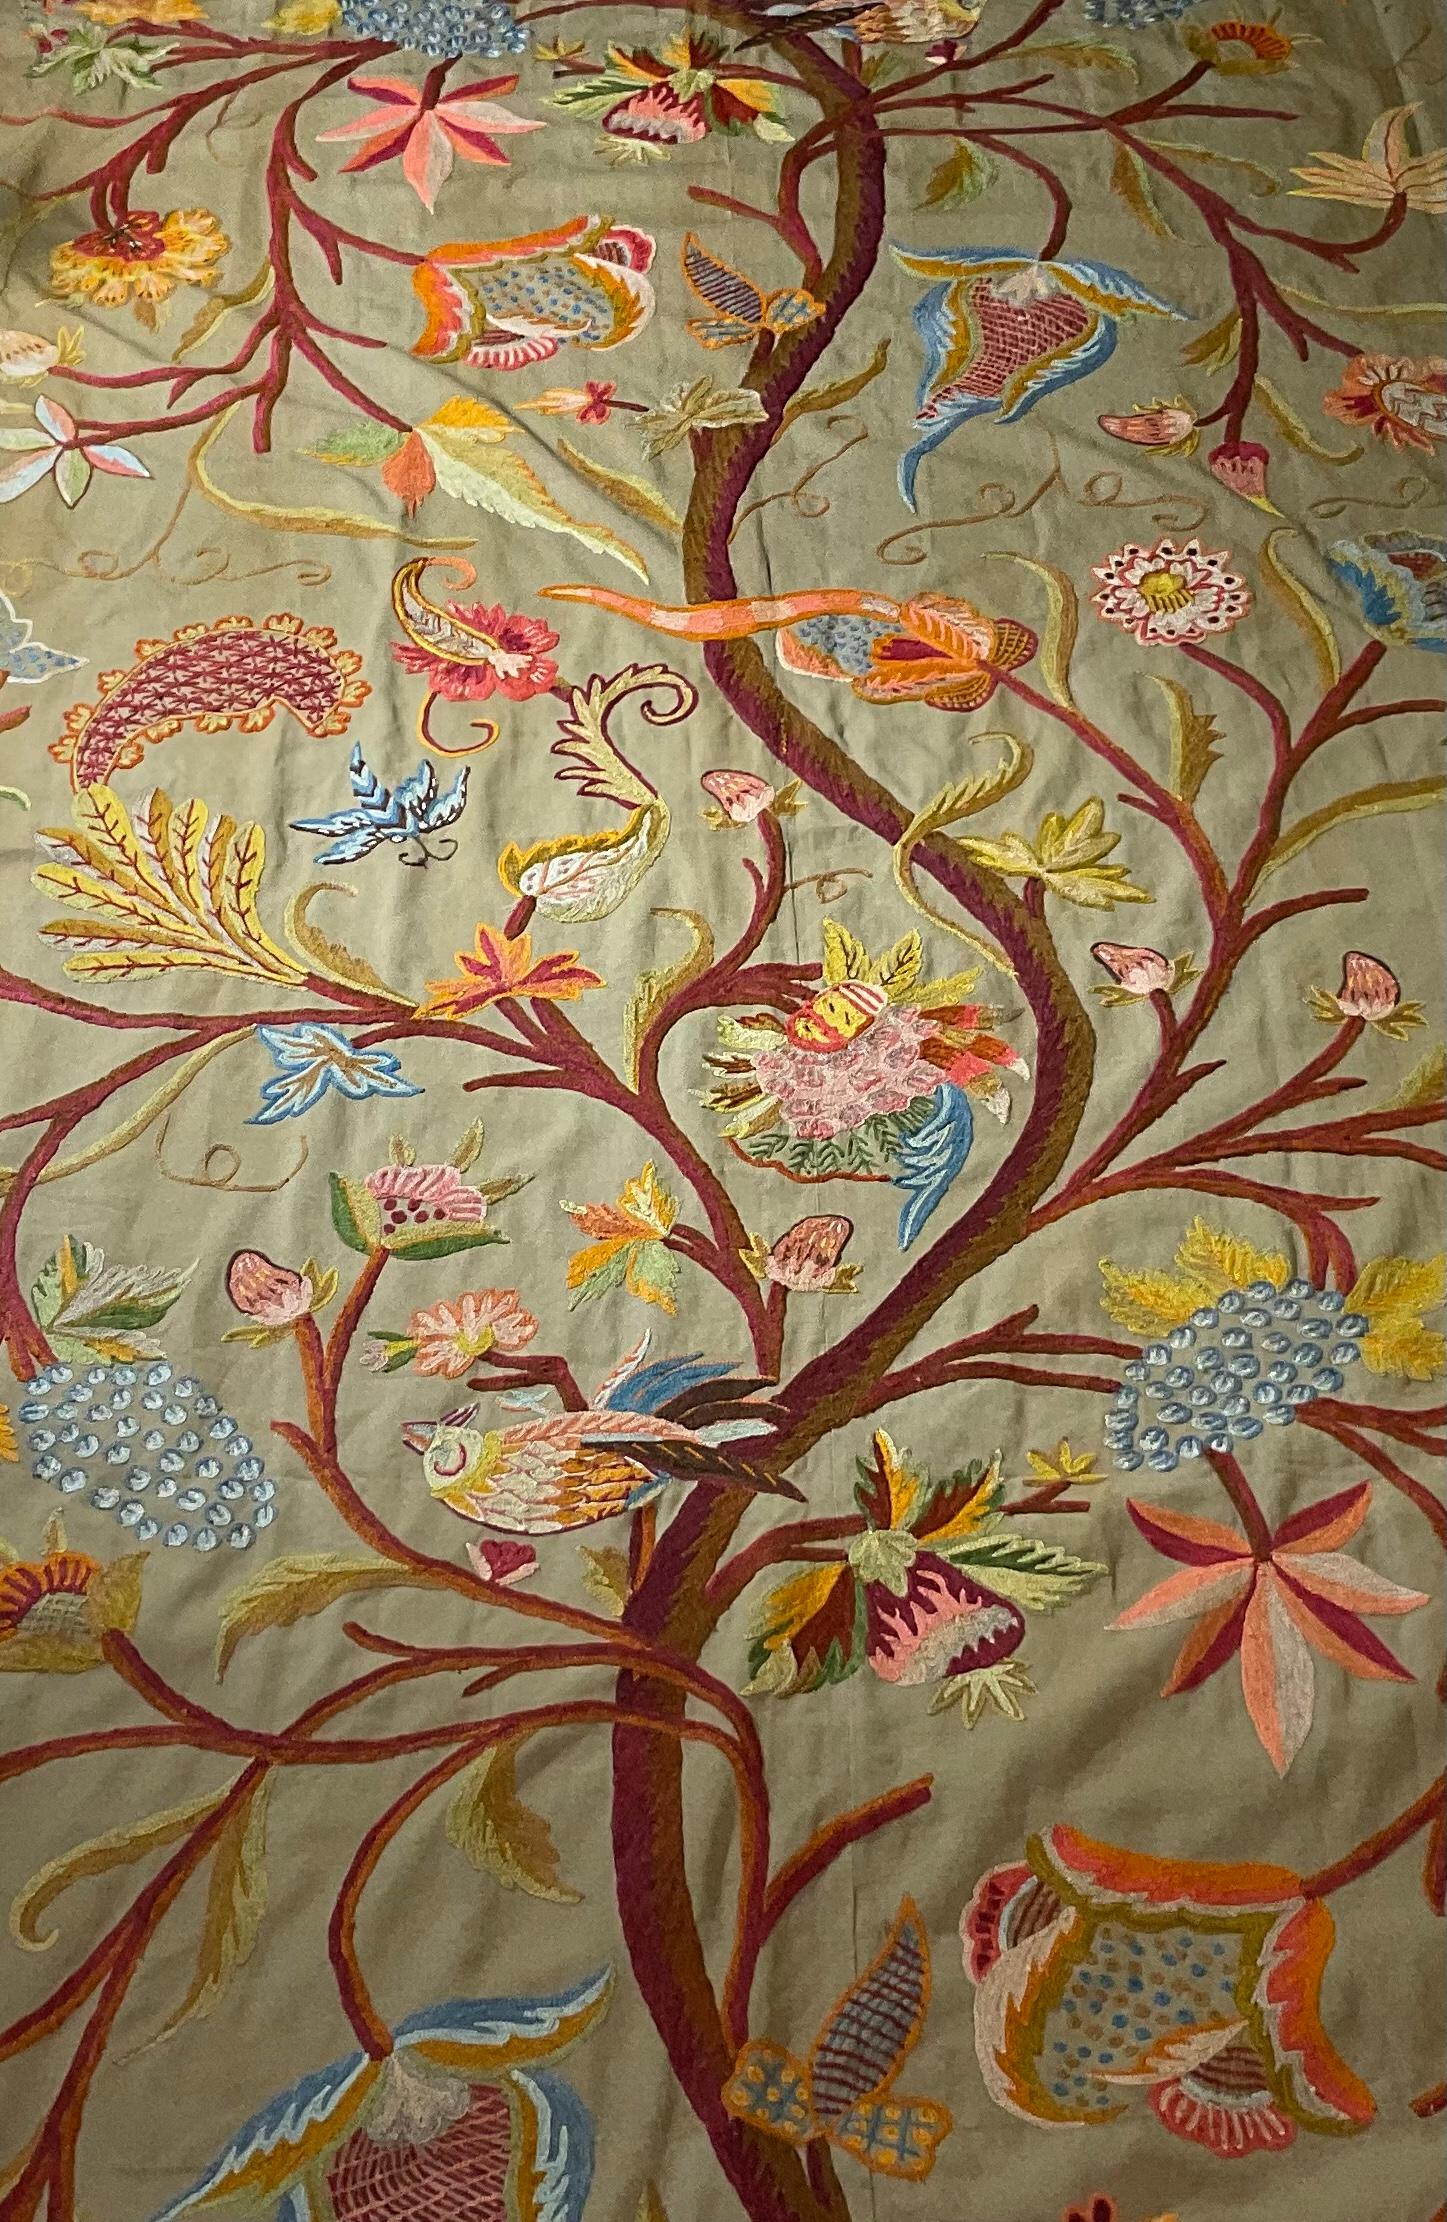 Exceptional needlepoint Hand stitched wall hanging beautiful colourful tree of life with birds bees, butterflies, flowers and vines, All on a camel color background motifs.
Originally was used as curtain or valance, then restored to use as wall